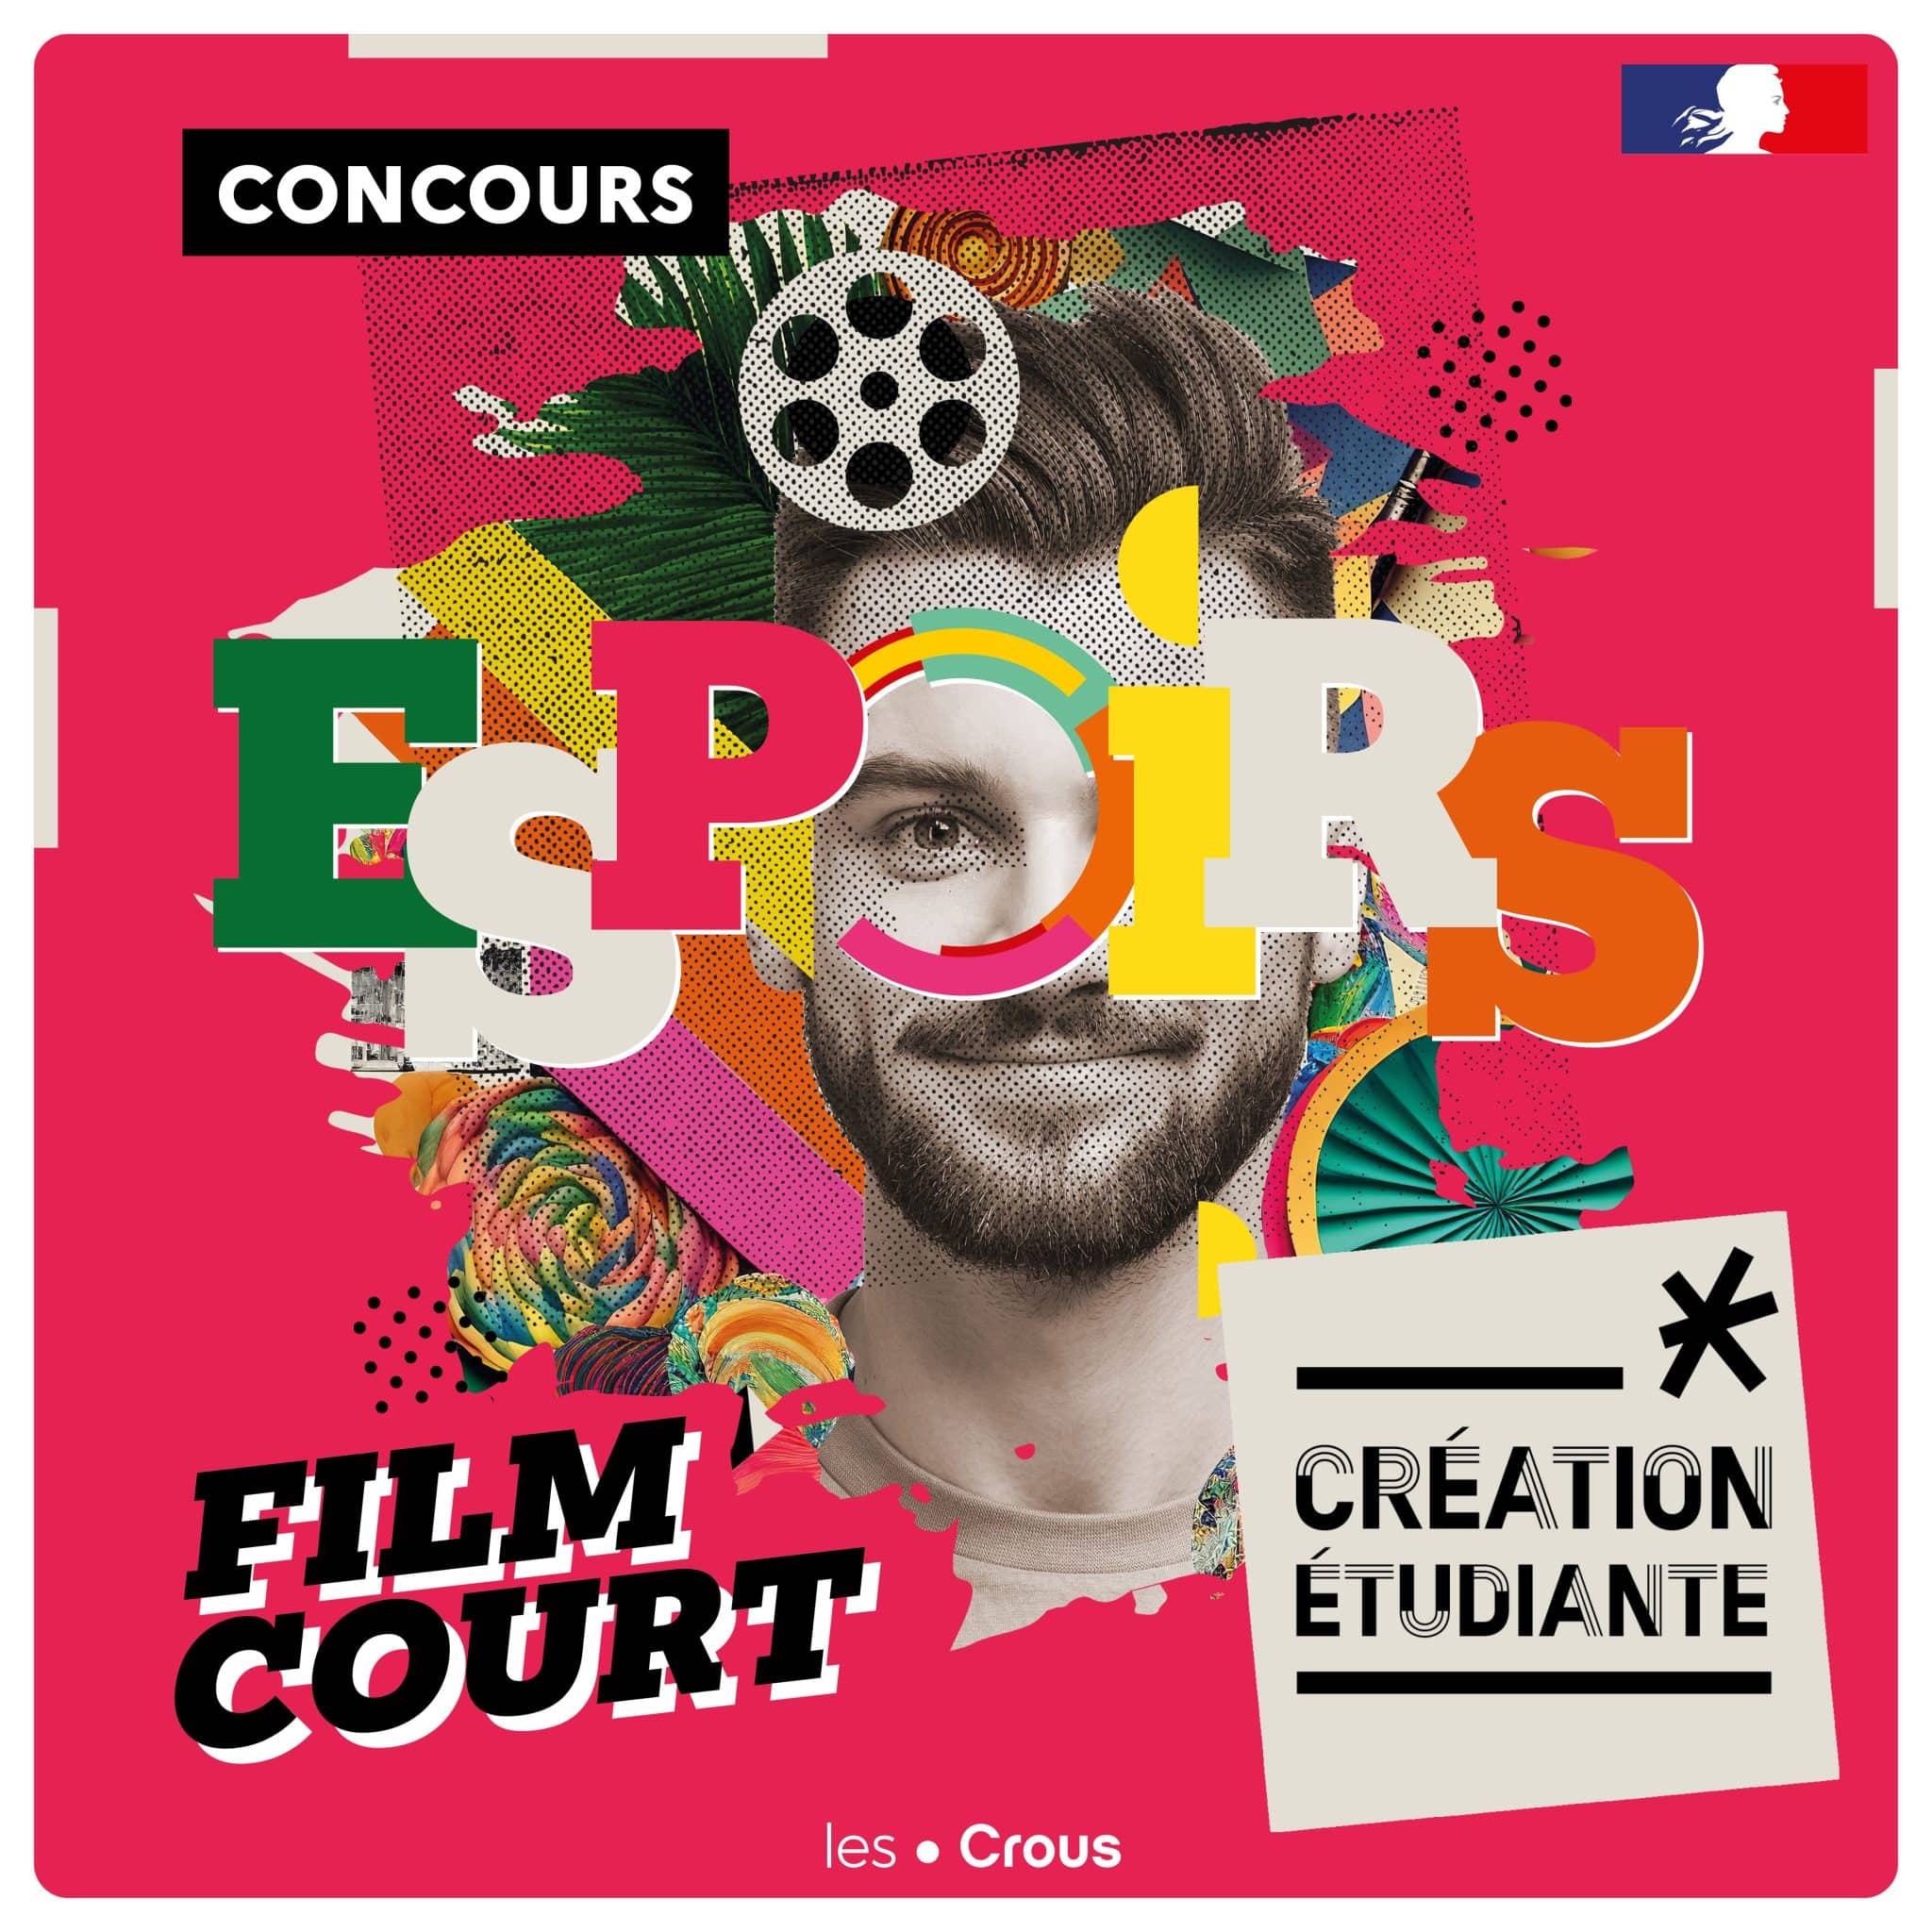 0143 23 CNOUS CAMPAGNE CULTURELLE RS CONCOURS BAT1 FILM1 compressed scaled